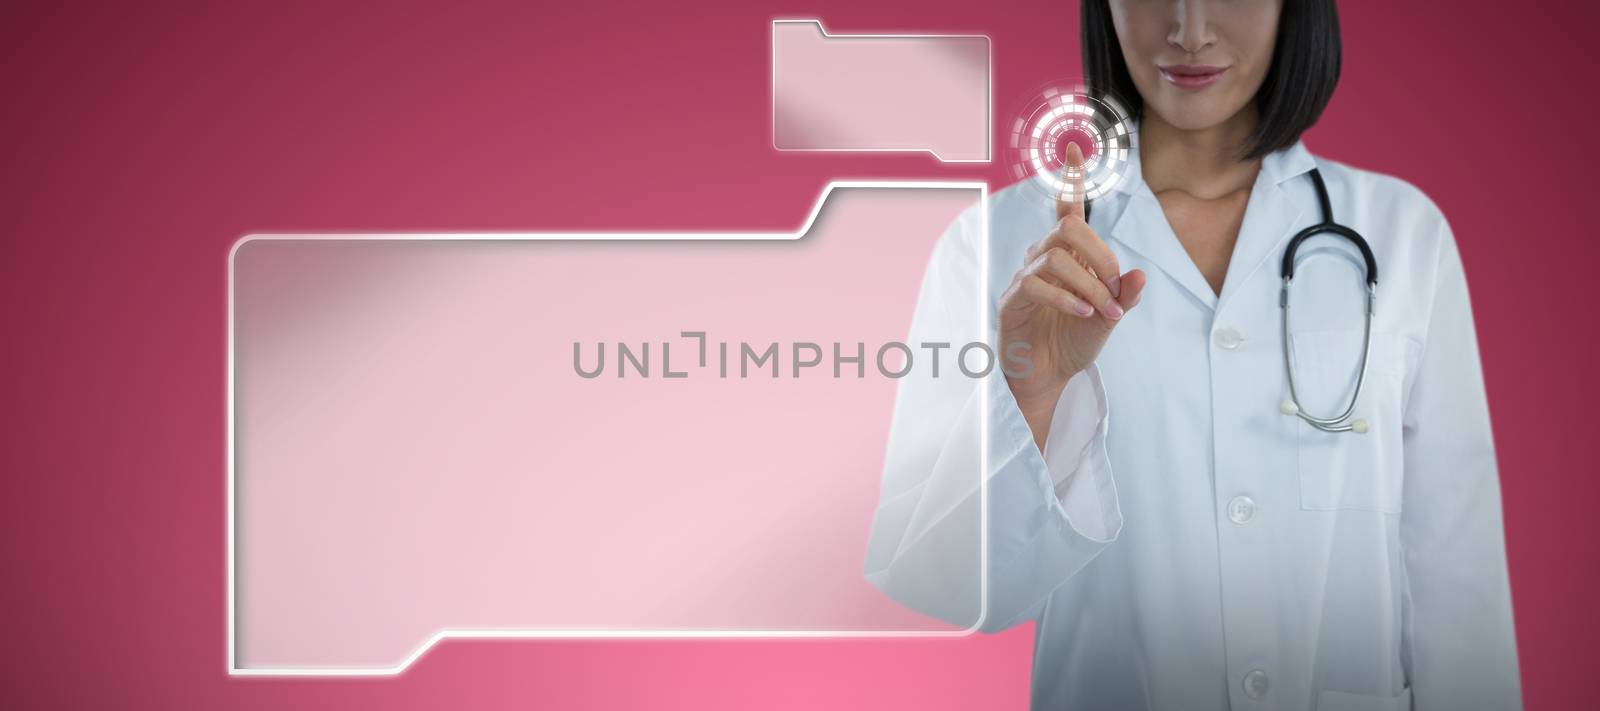 Mid section of female doctor touching invisible screen against abstract maroon background